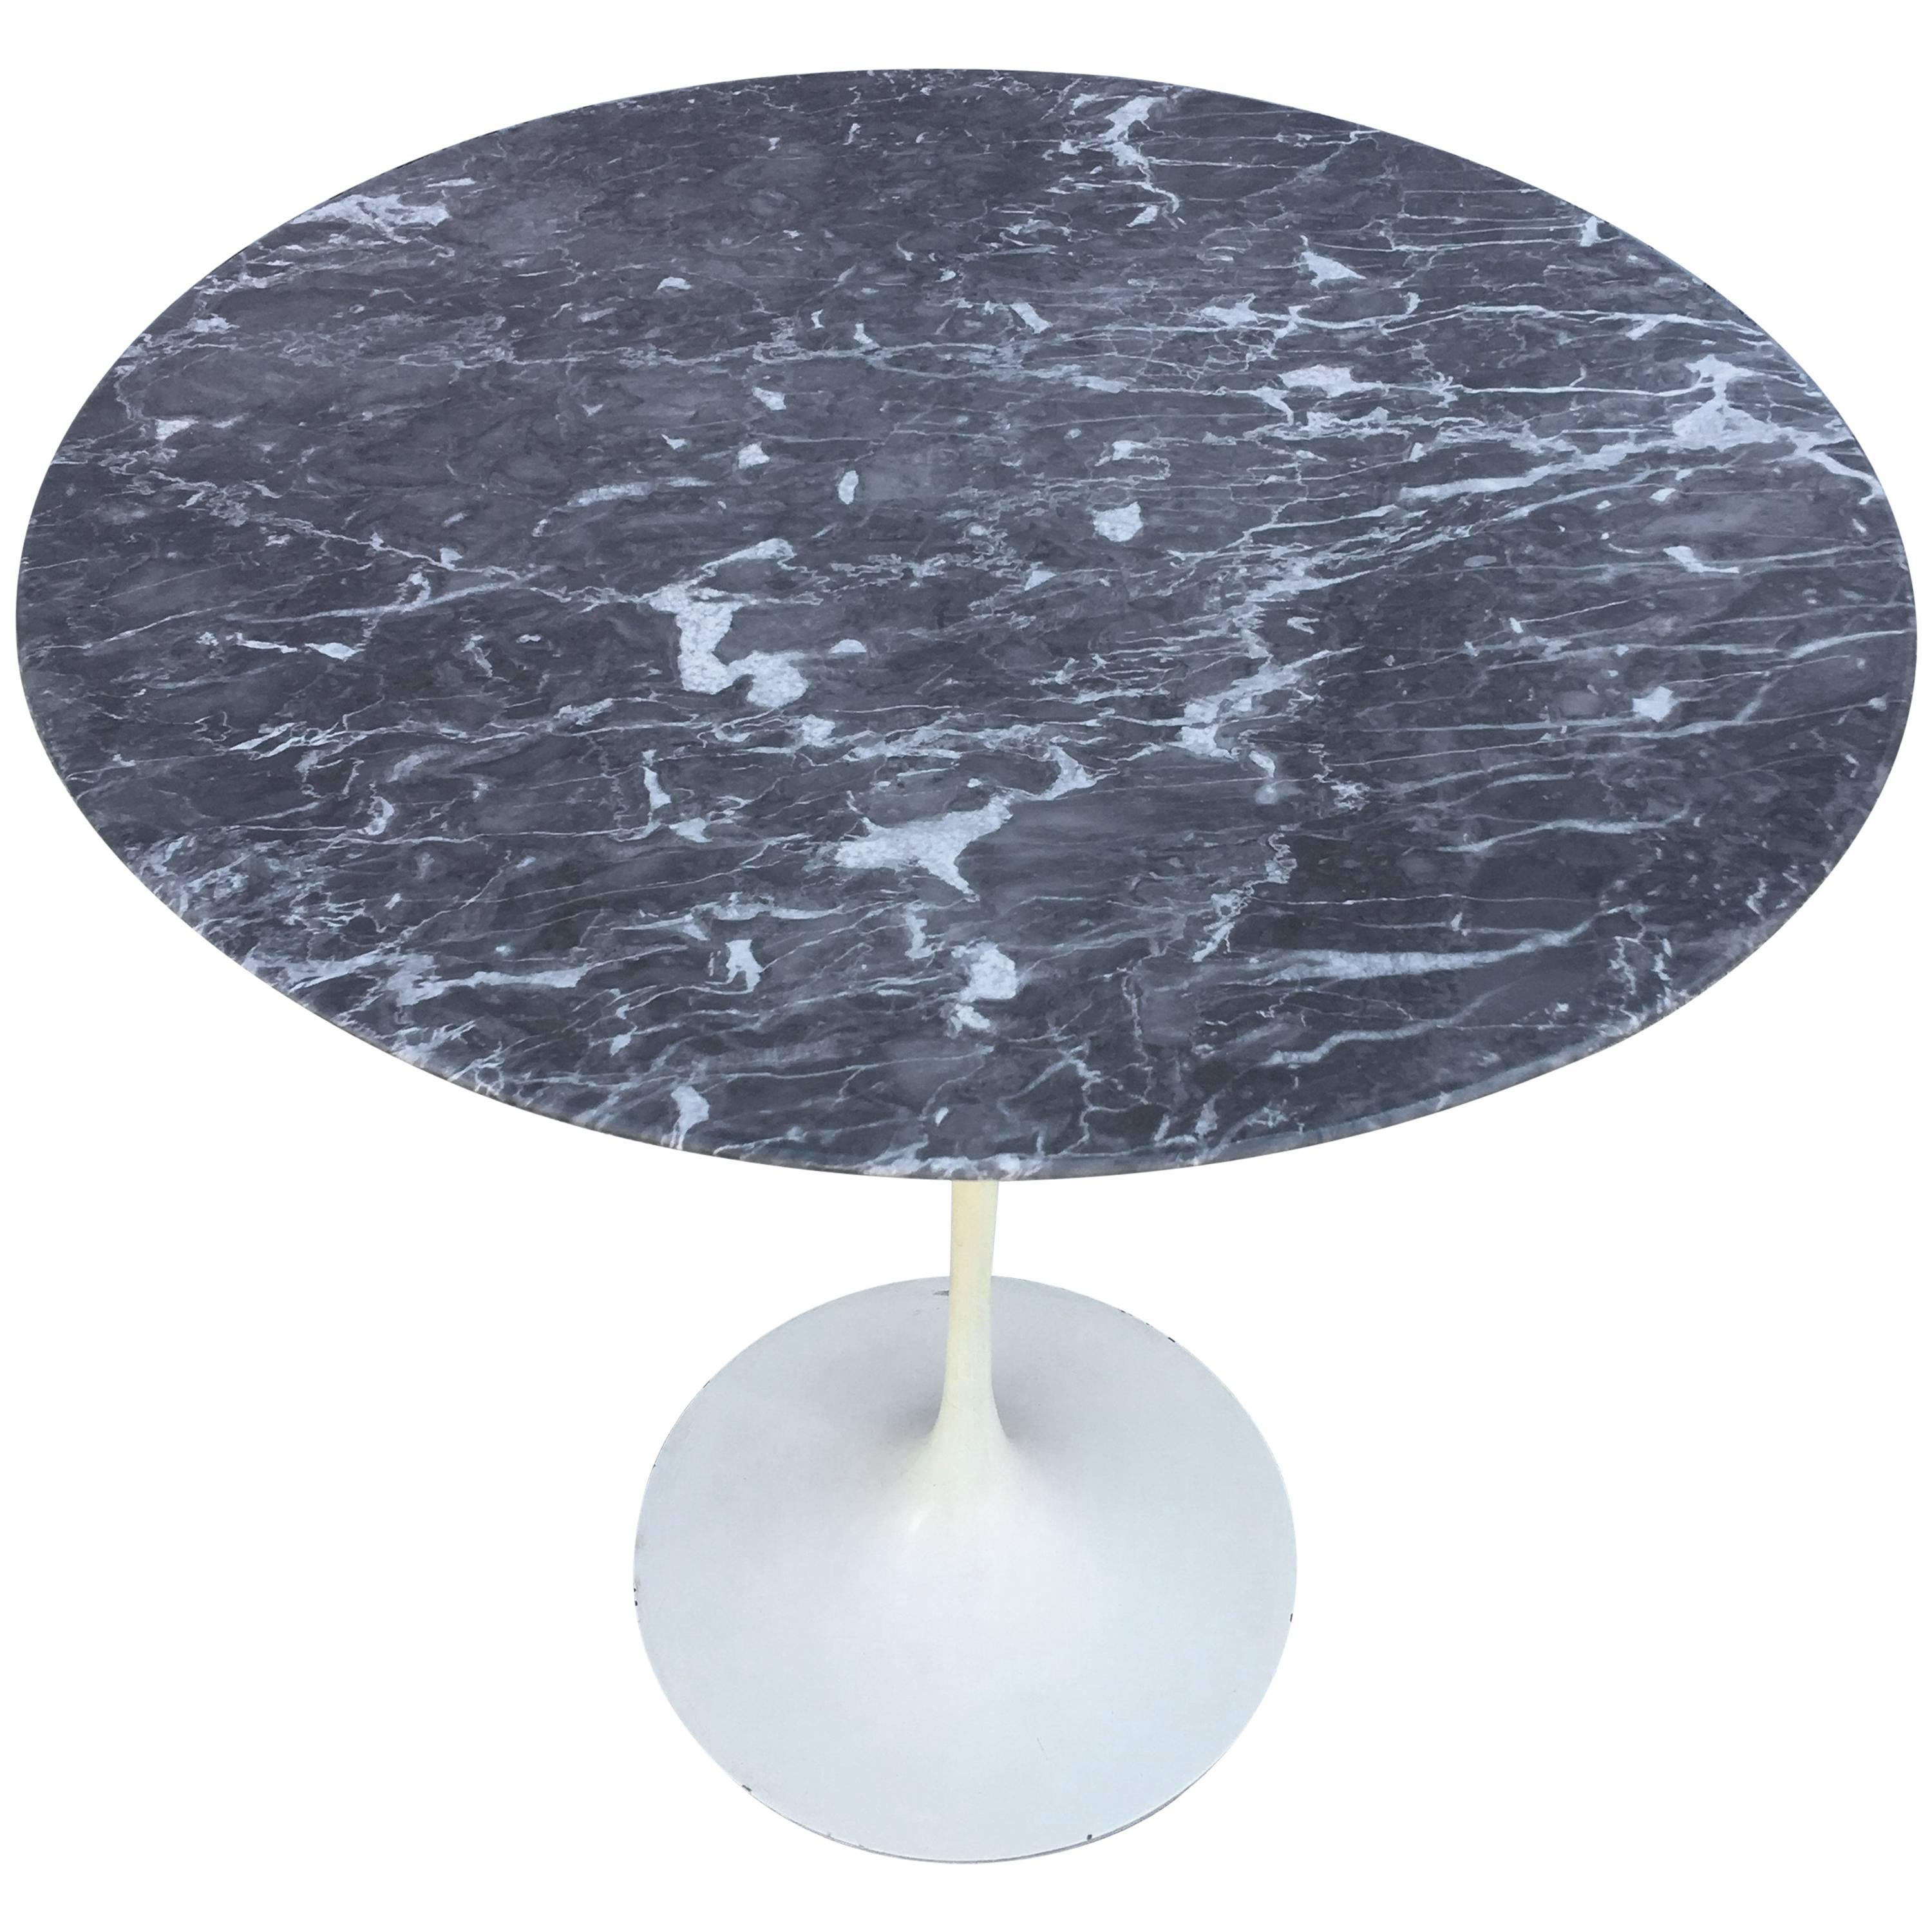 Impeccable Eero Saarinen Marble Tulip Side Table for Knoll